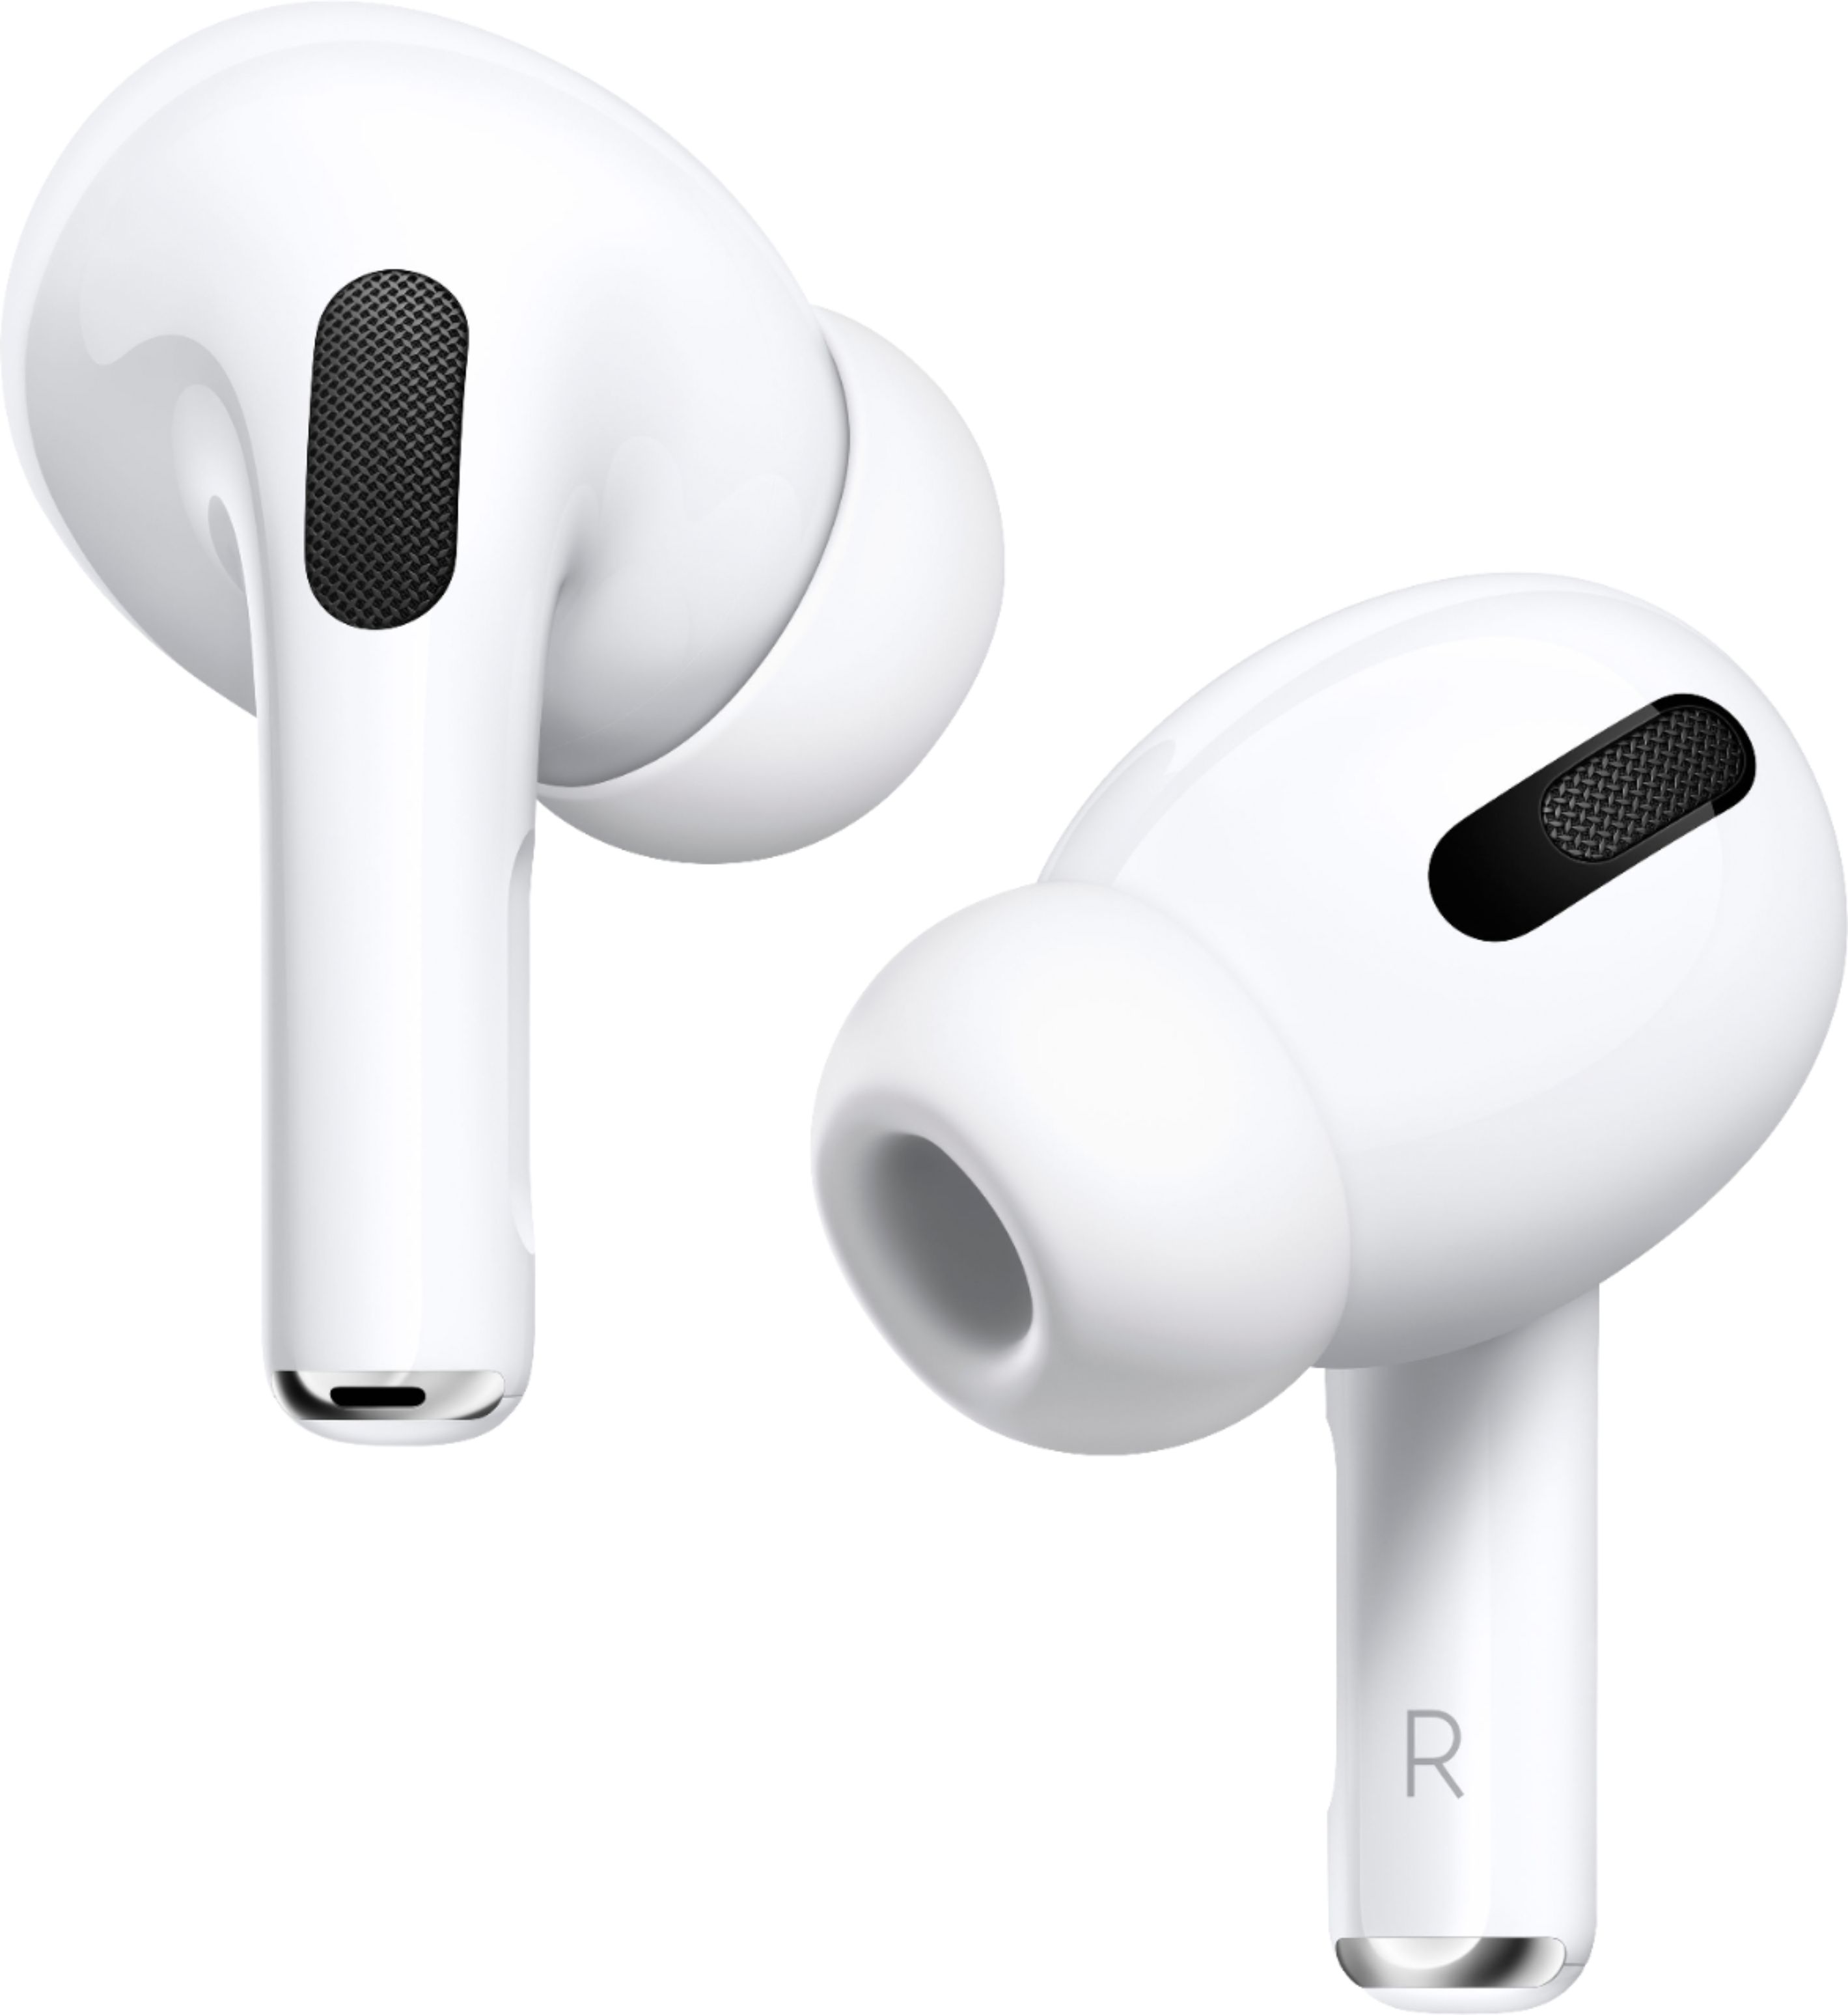 Apple AirPods Pro White 189.99 MWP22AM/A - at BestBuy YMMV